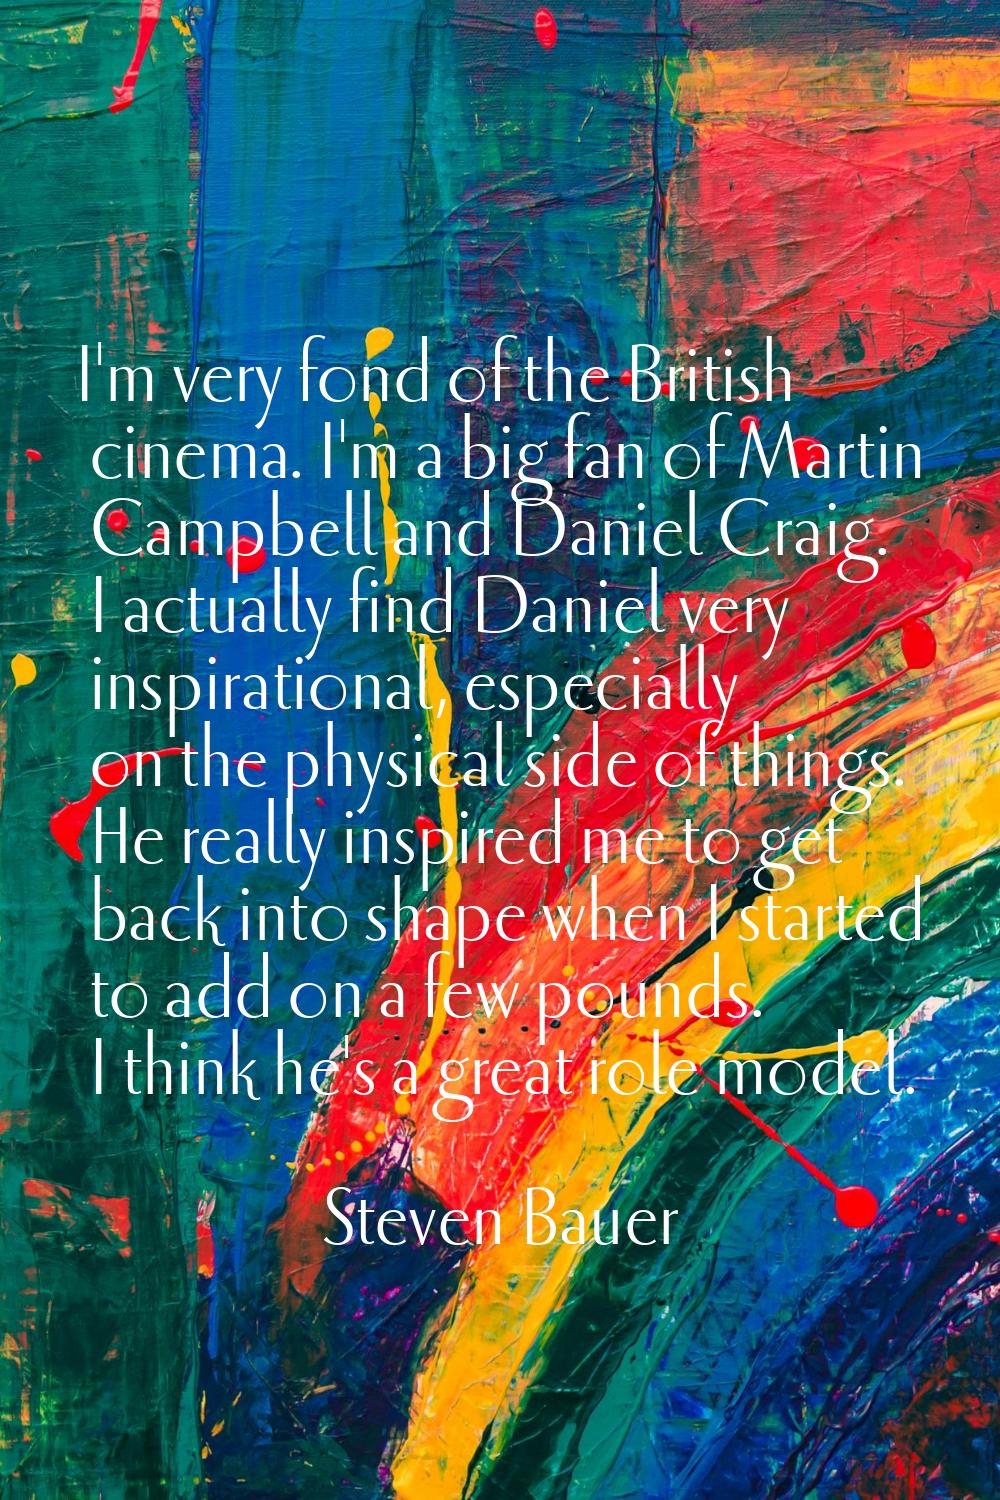 I'm very fond of the British cinema. I'm a big fan of Martin Campbell and Daniel Craig. I actually 